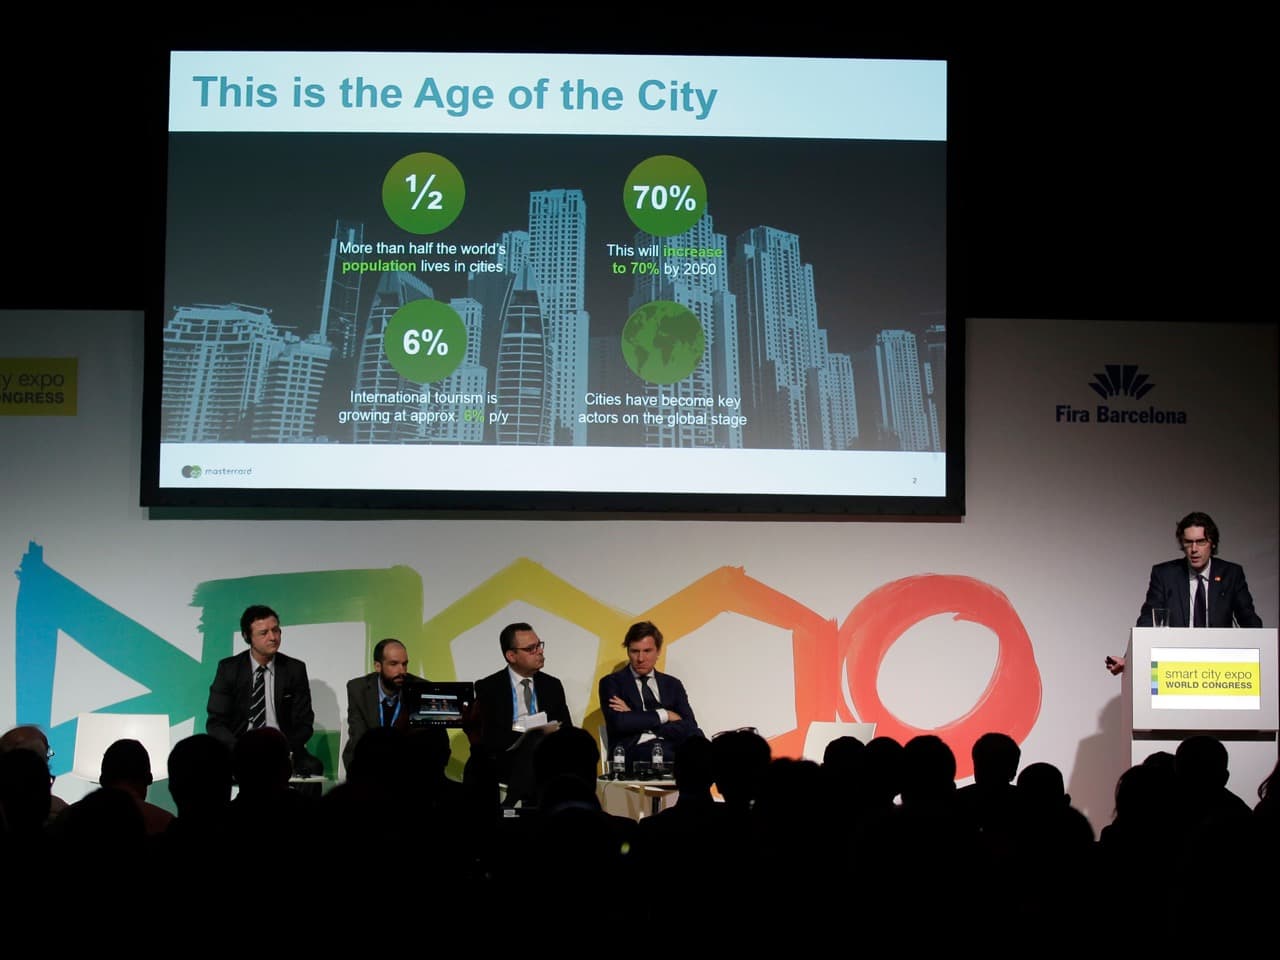 A representative of Mastercard speaks about citizen centric urban services at Smart City Expo World Congress in Barcelona, 15 November 2016, Manu Fernandez/AP Images for Mastercard